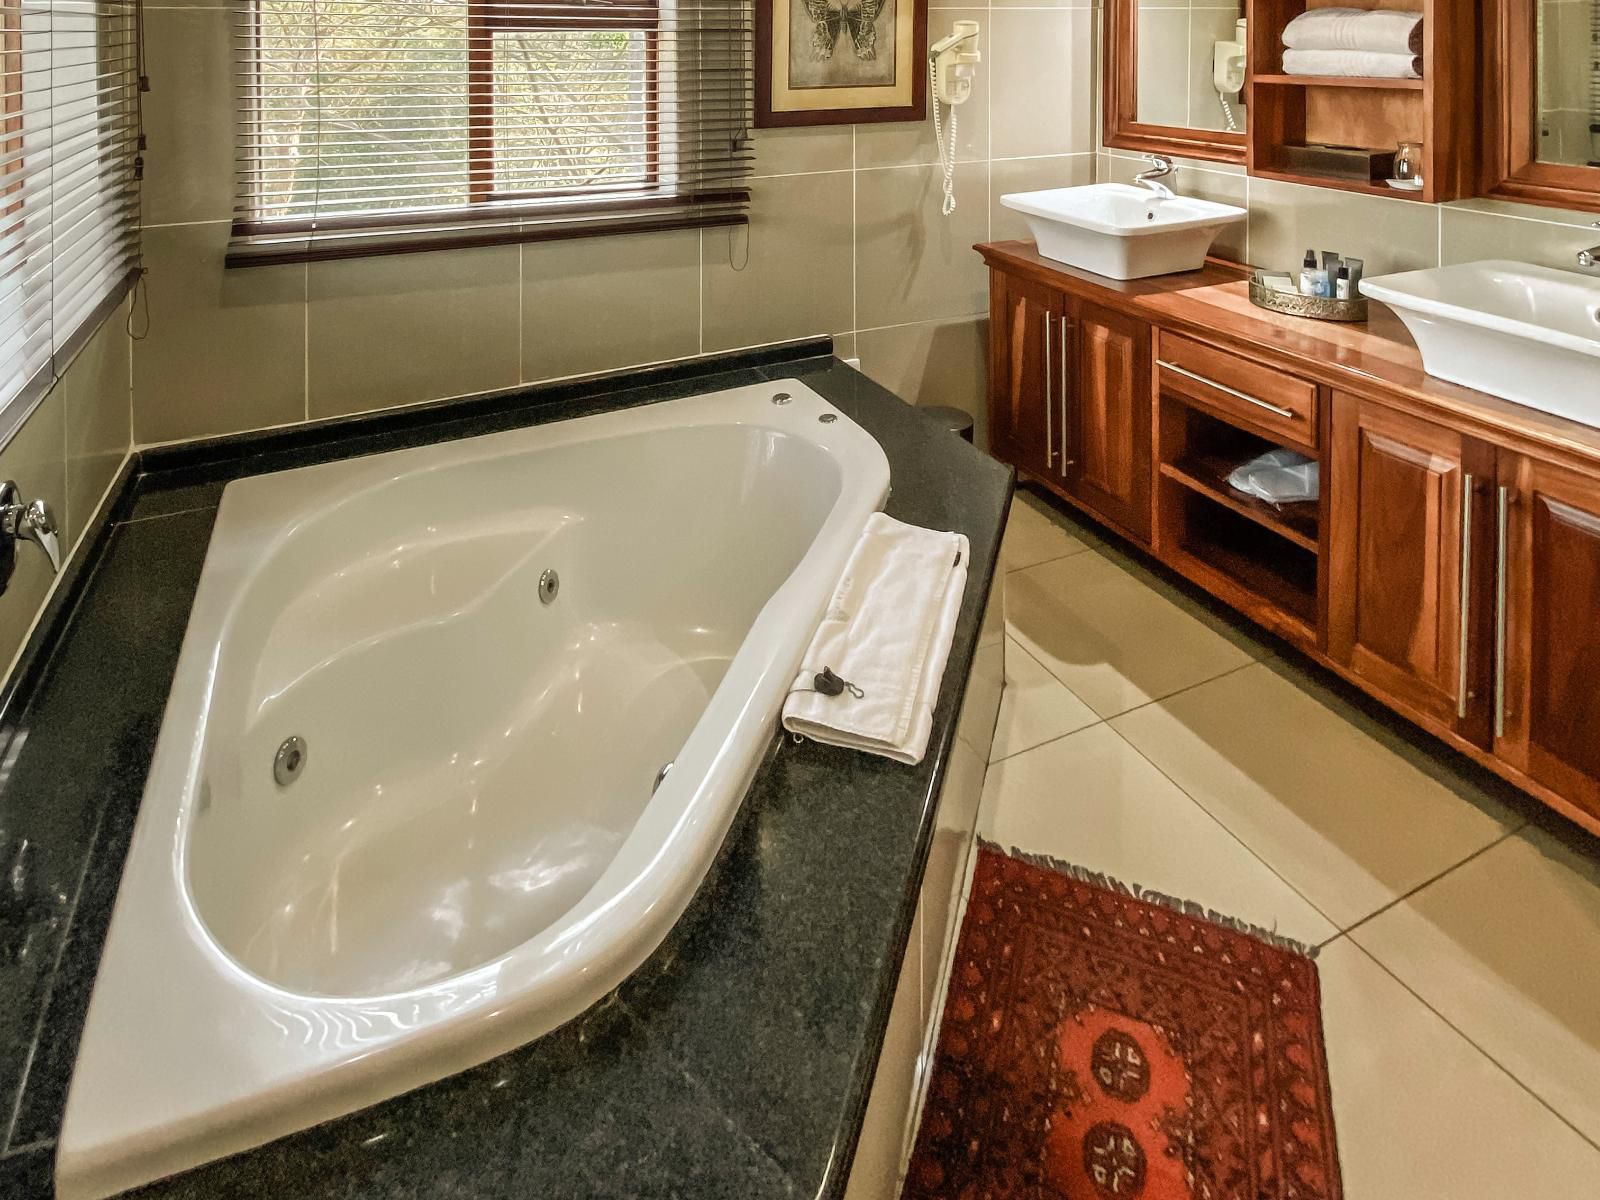 Fairview Hotels Spa And Golf Resort Tzaneen Limpopo Province South Africa Sepia Tones, Bathroom